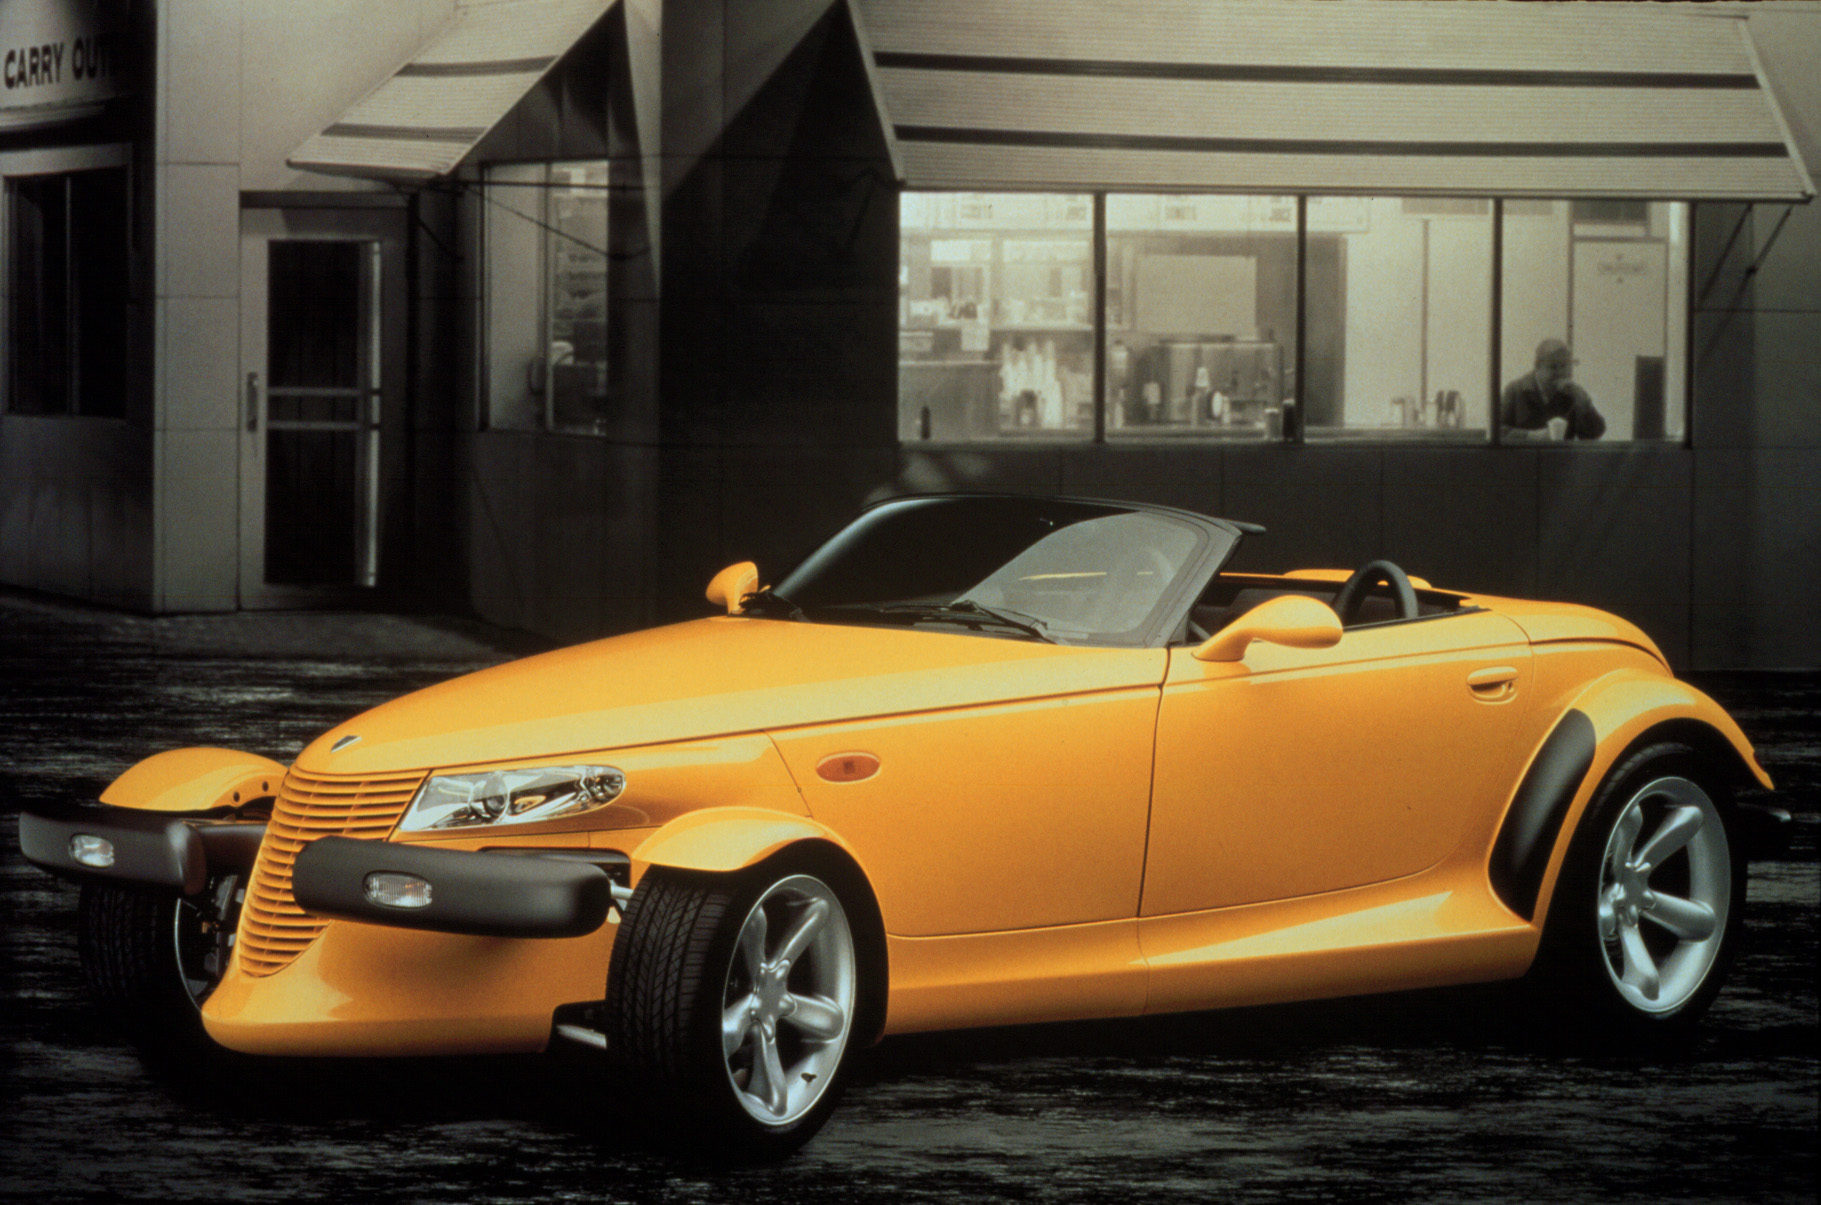 1999 Plymouth Prowler. PP-902.